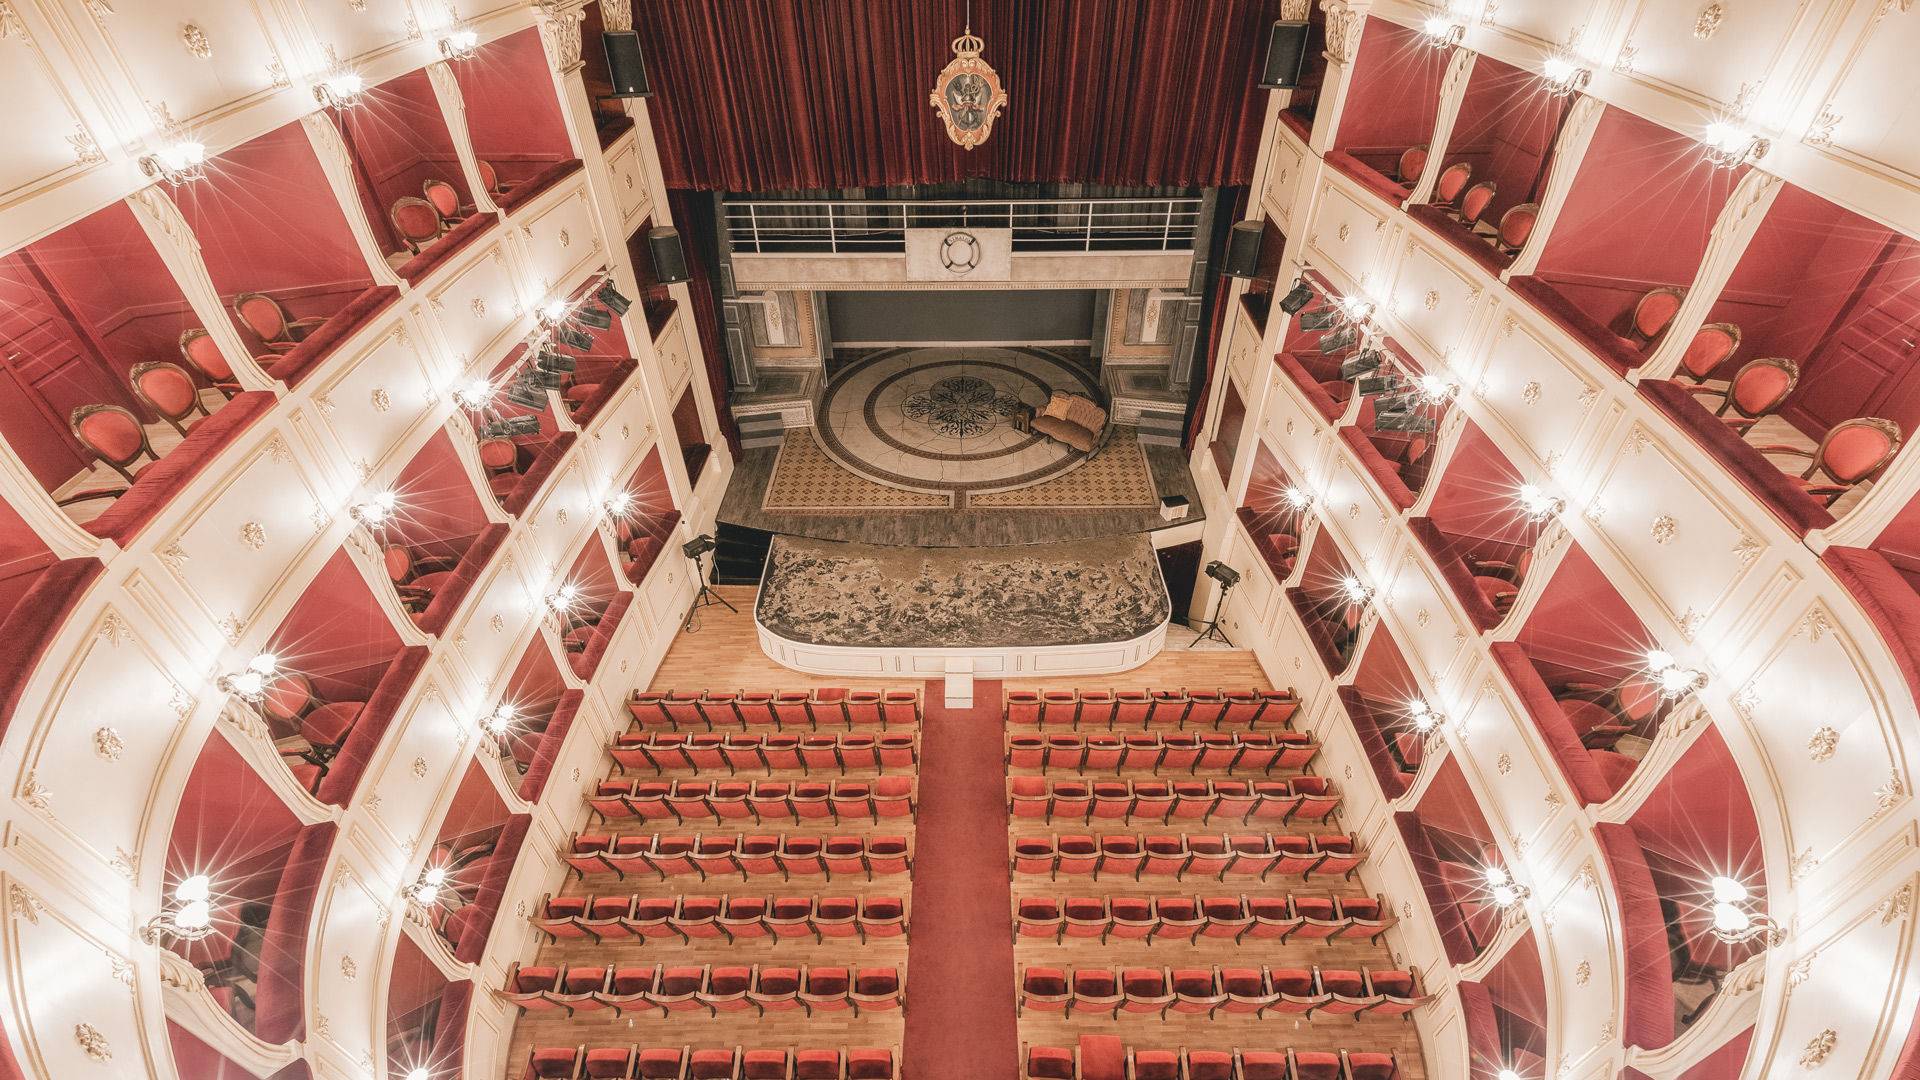 The Apollo Theatre was modelled, in part, on the Scala di Milano, with four layers of boxes and an elaborate ceiling fresco adding a sense of opulence to the intimate main hall